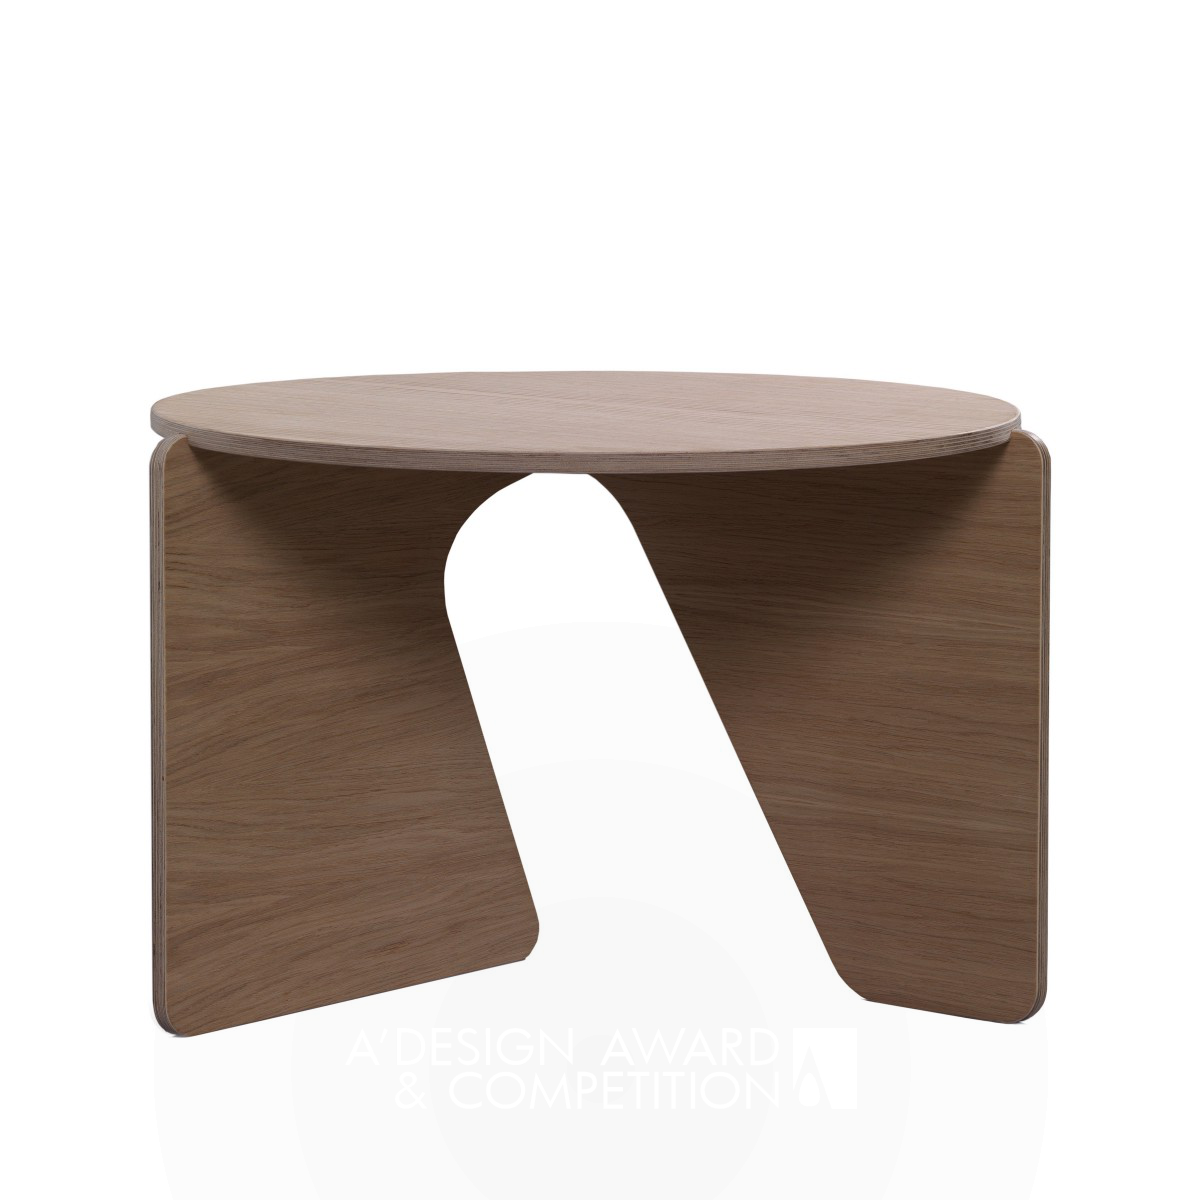 Enso Table by Aad Bos